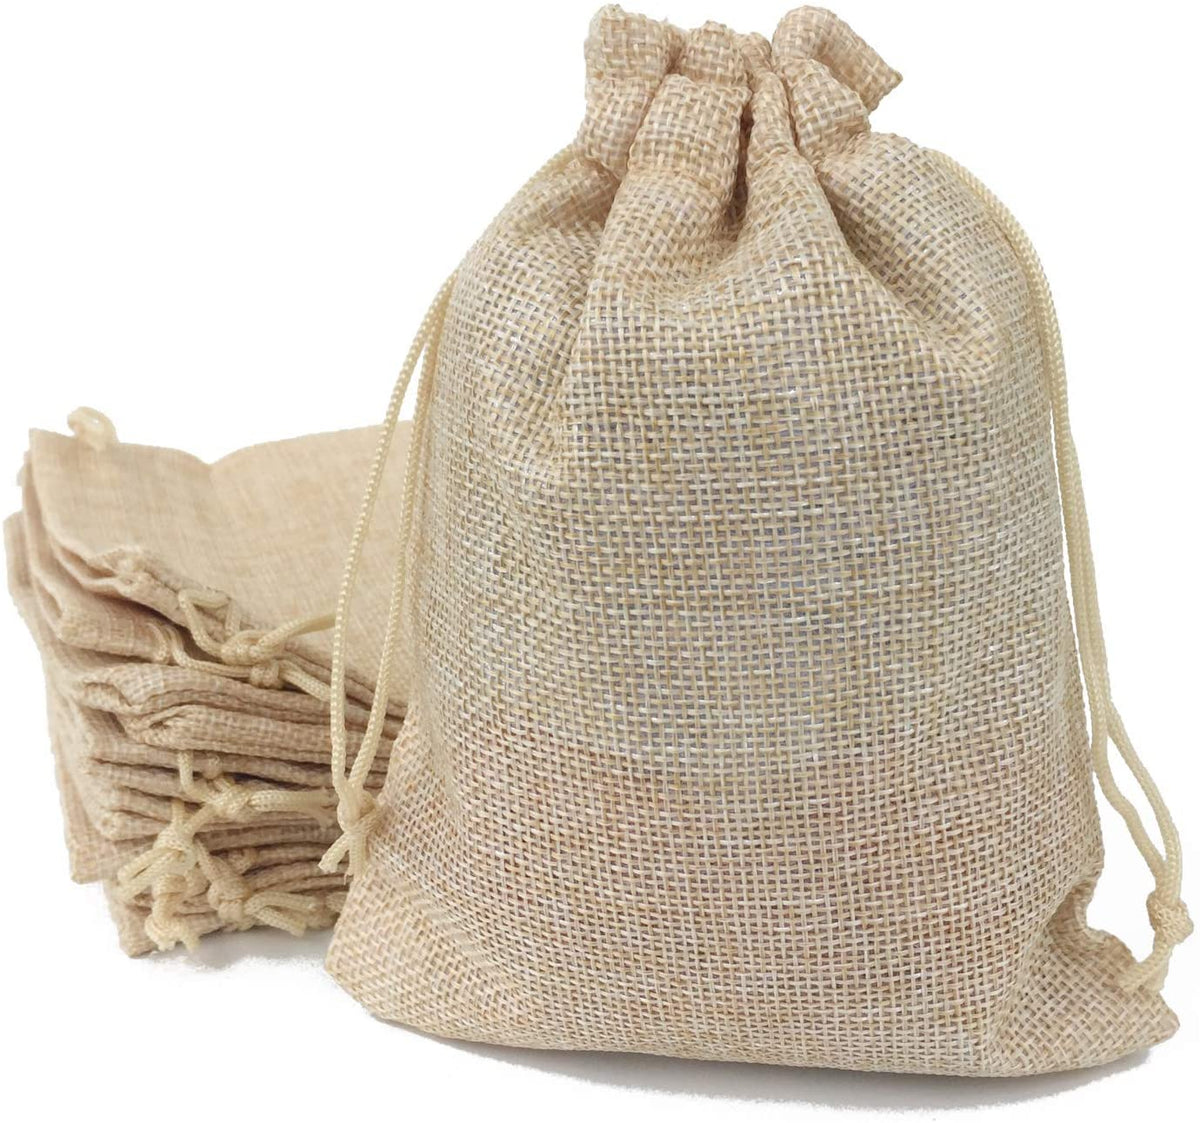 Willow 48Pcs Burlap Bags with Drawstring Gift Jute bags Included Cotton Lining (CREAM, 10X14)